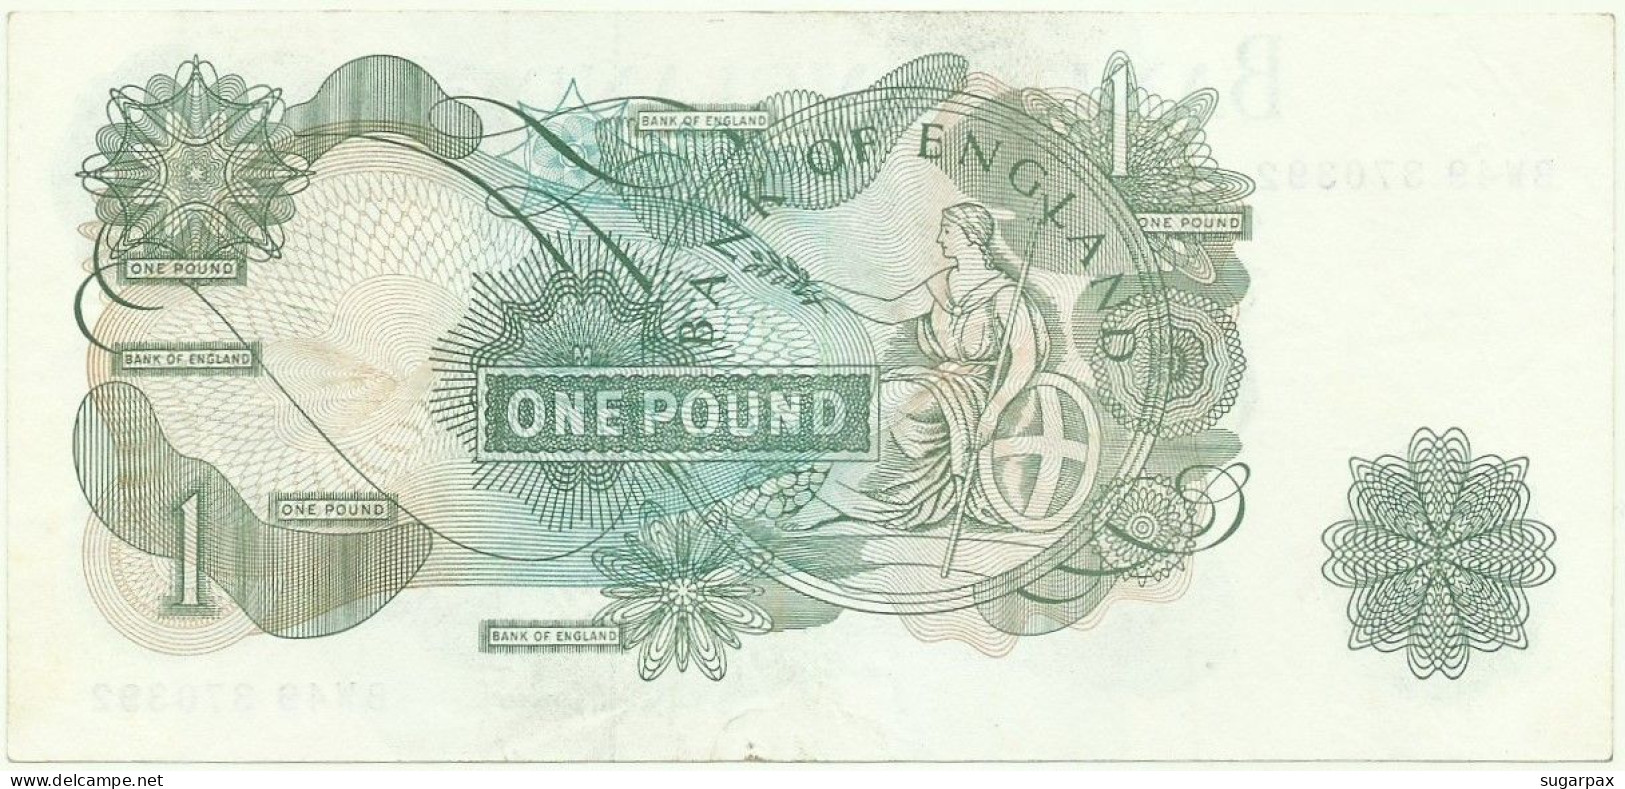 GREAT BRITAIN - 1 POUND - ND ( 1970-77 ) - P 374 G - Serie BW49 - BANK OF ENGLAND - United Kingdom - 1 Pond